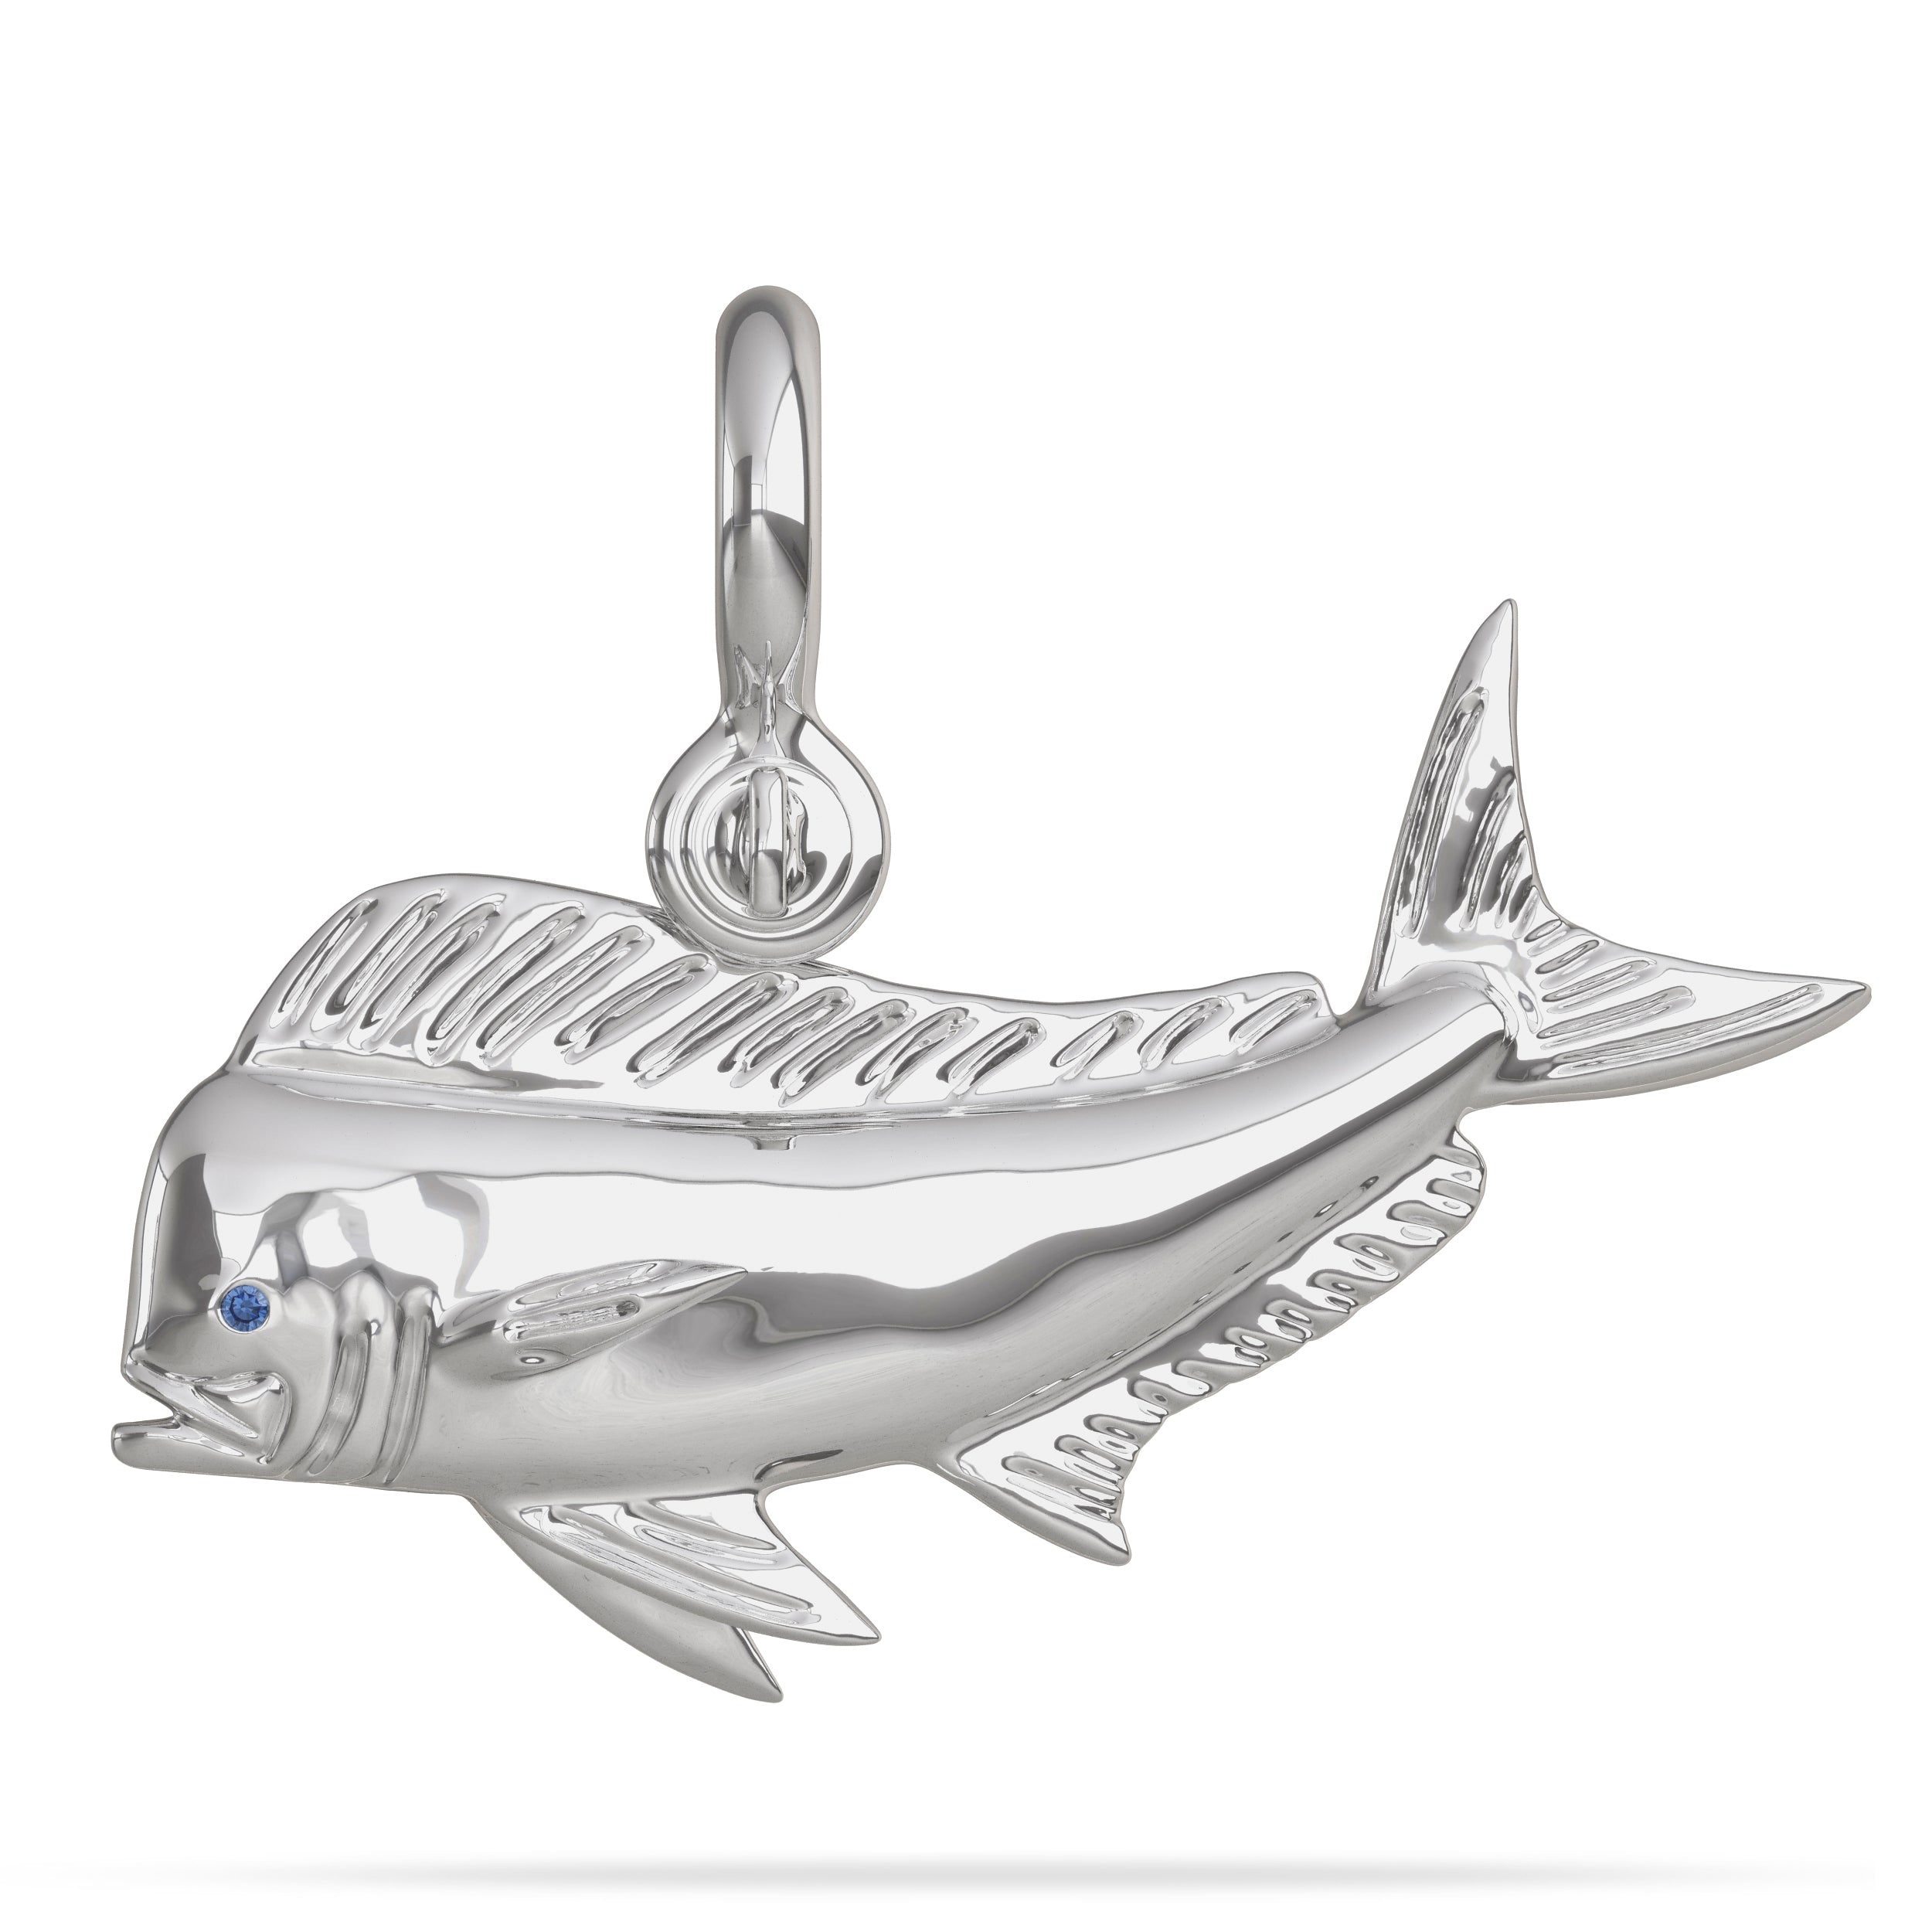 Sterling Silver Mahi Mahi Pendant High Polished Mirror Finish With Blue Sapphire Eye with A Mariner Shackle Bail Custom Designed By Nautical Treasure Jewelry In The Florida Keys 